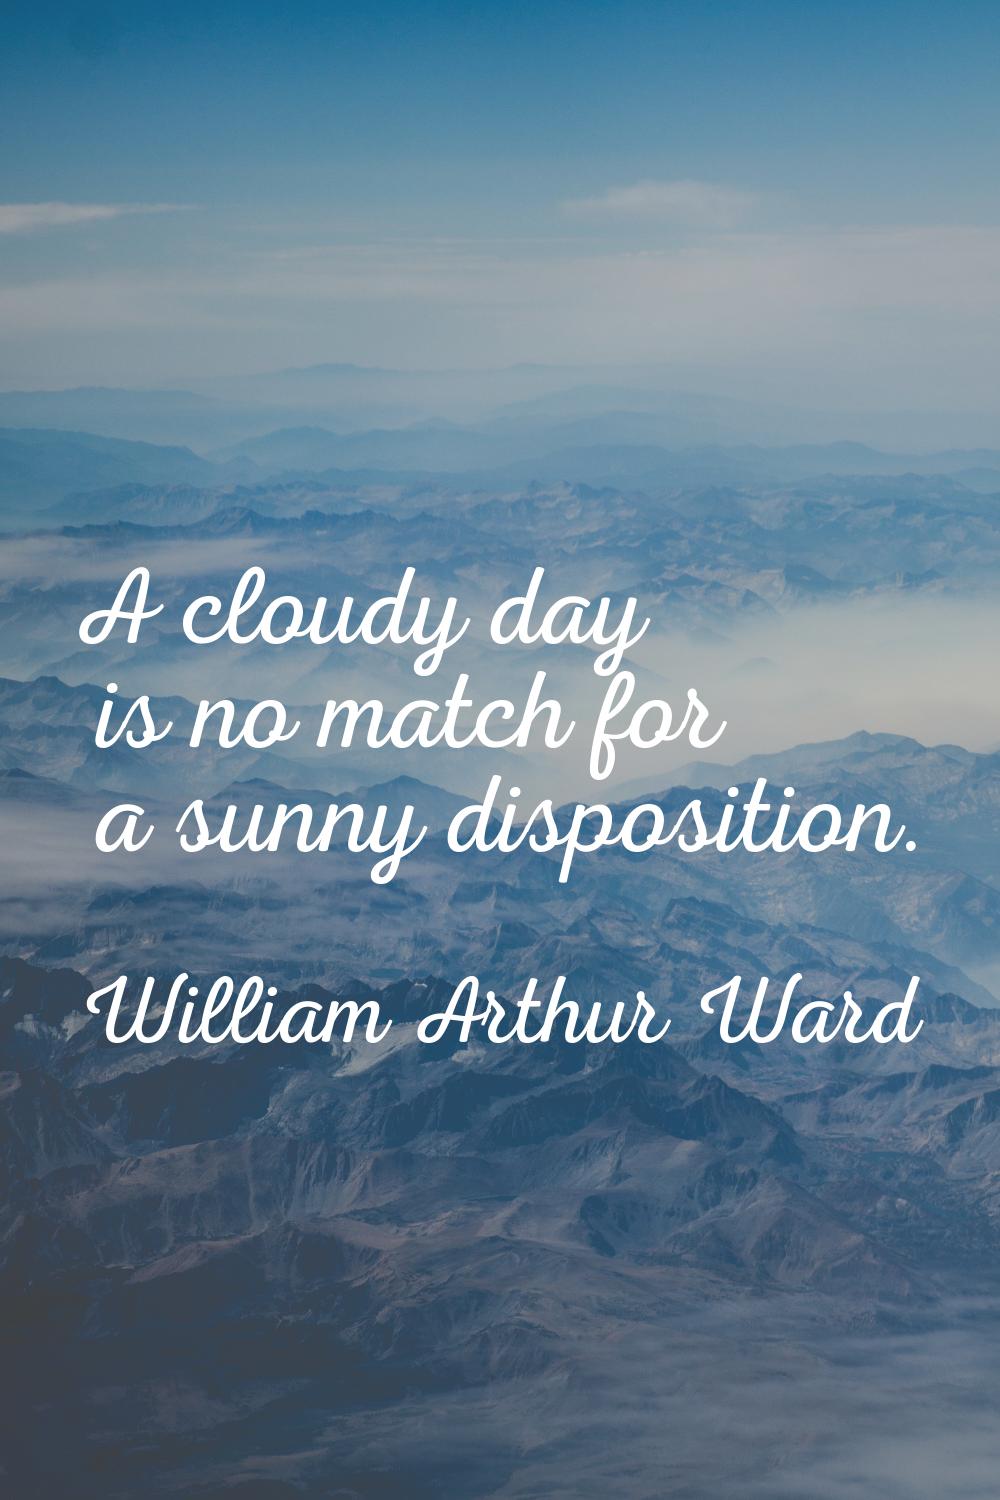 A cloudy day is no match for a sunny disposition.